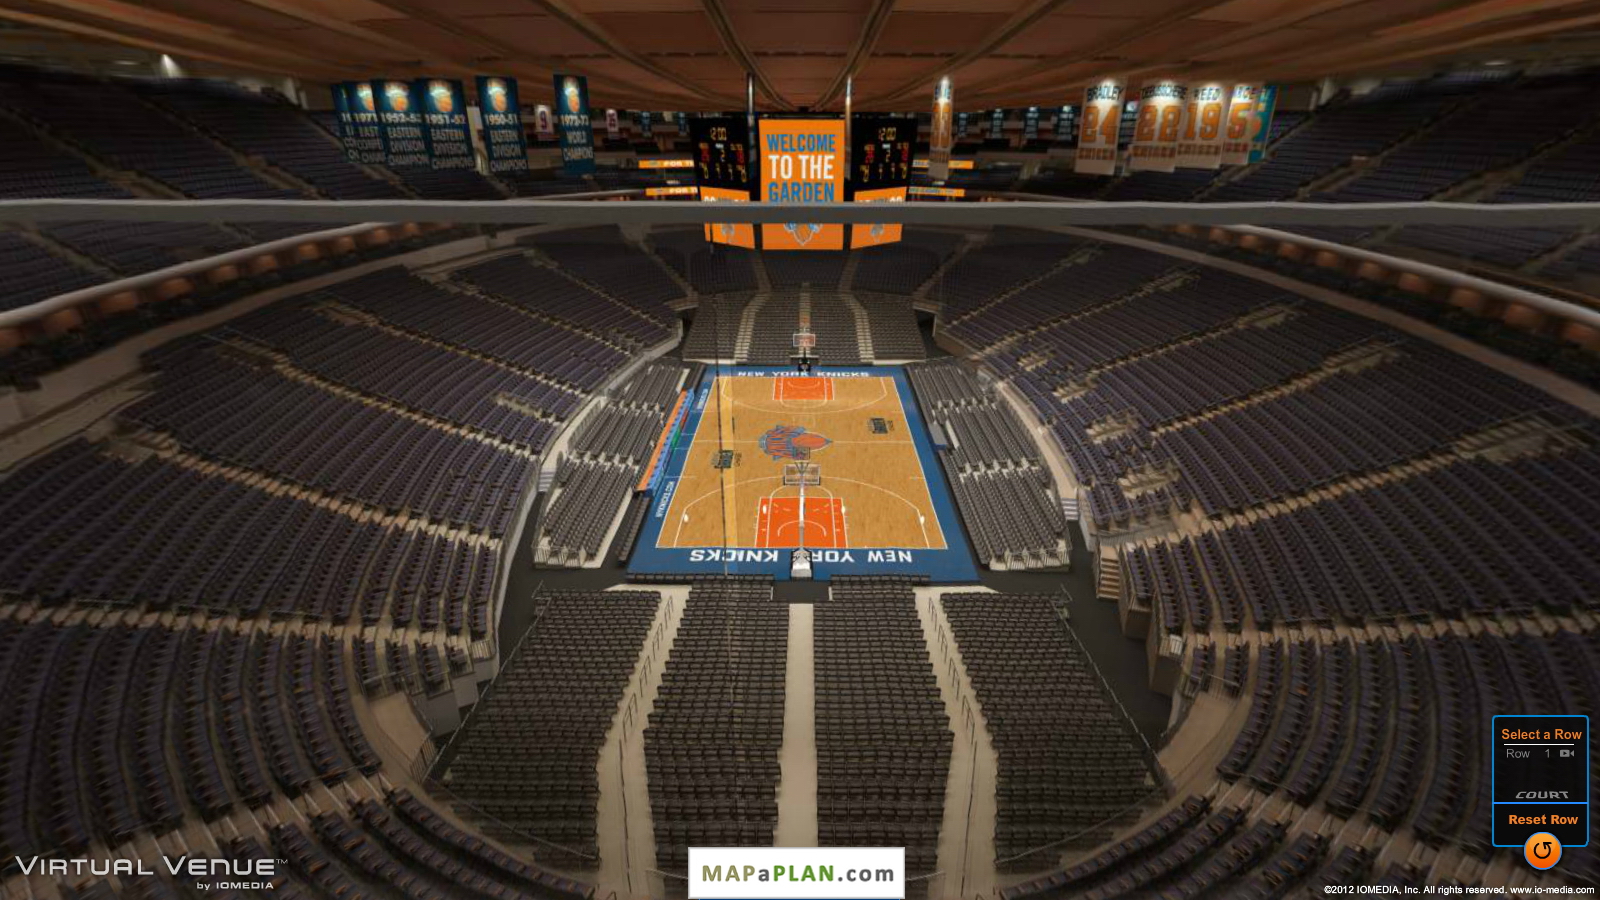 Msg Seating Chart View